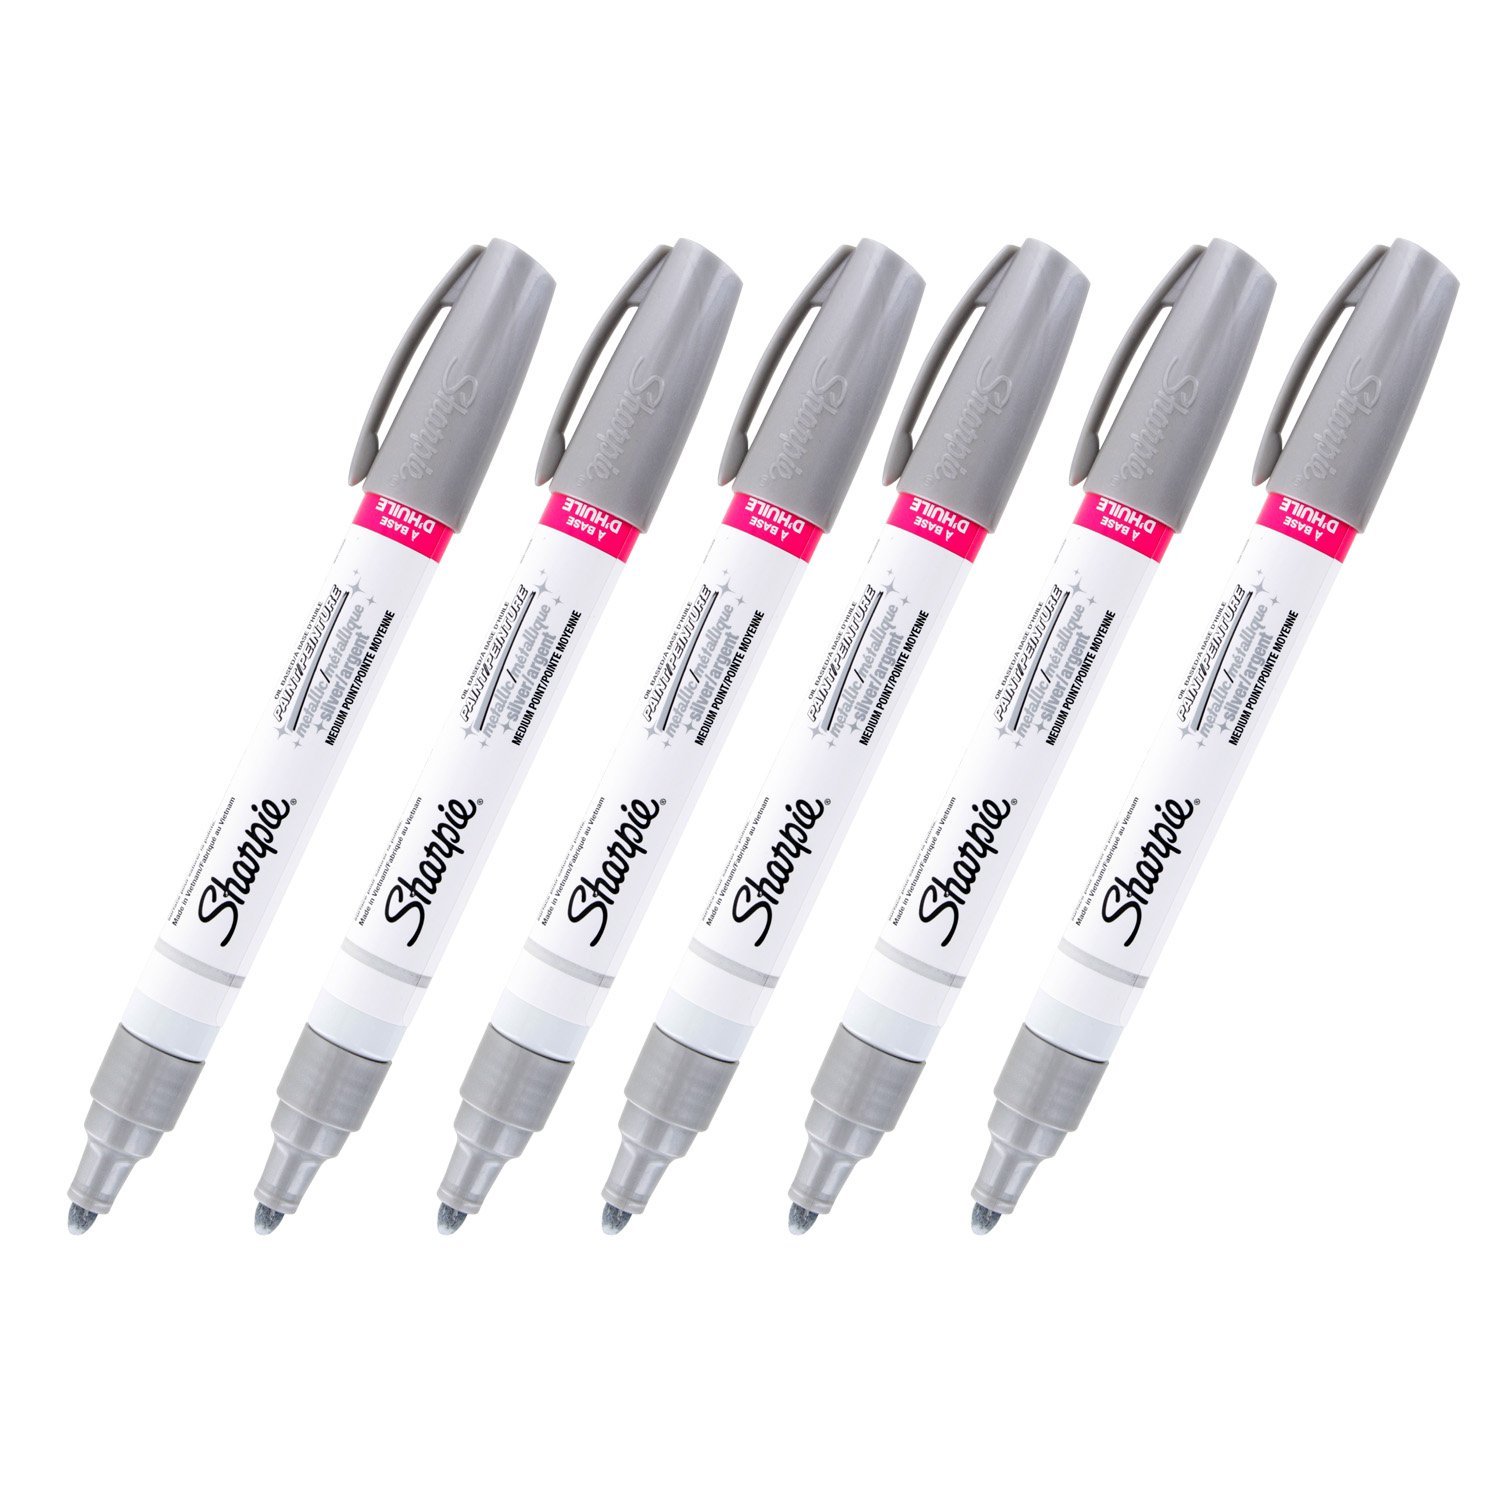 Sharpie Oil-Based Paint Marker, Medium Point, Silver Ink, 6 Markers (35560)